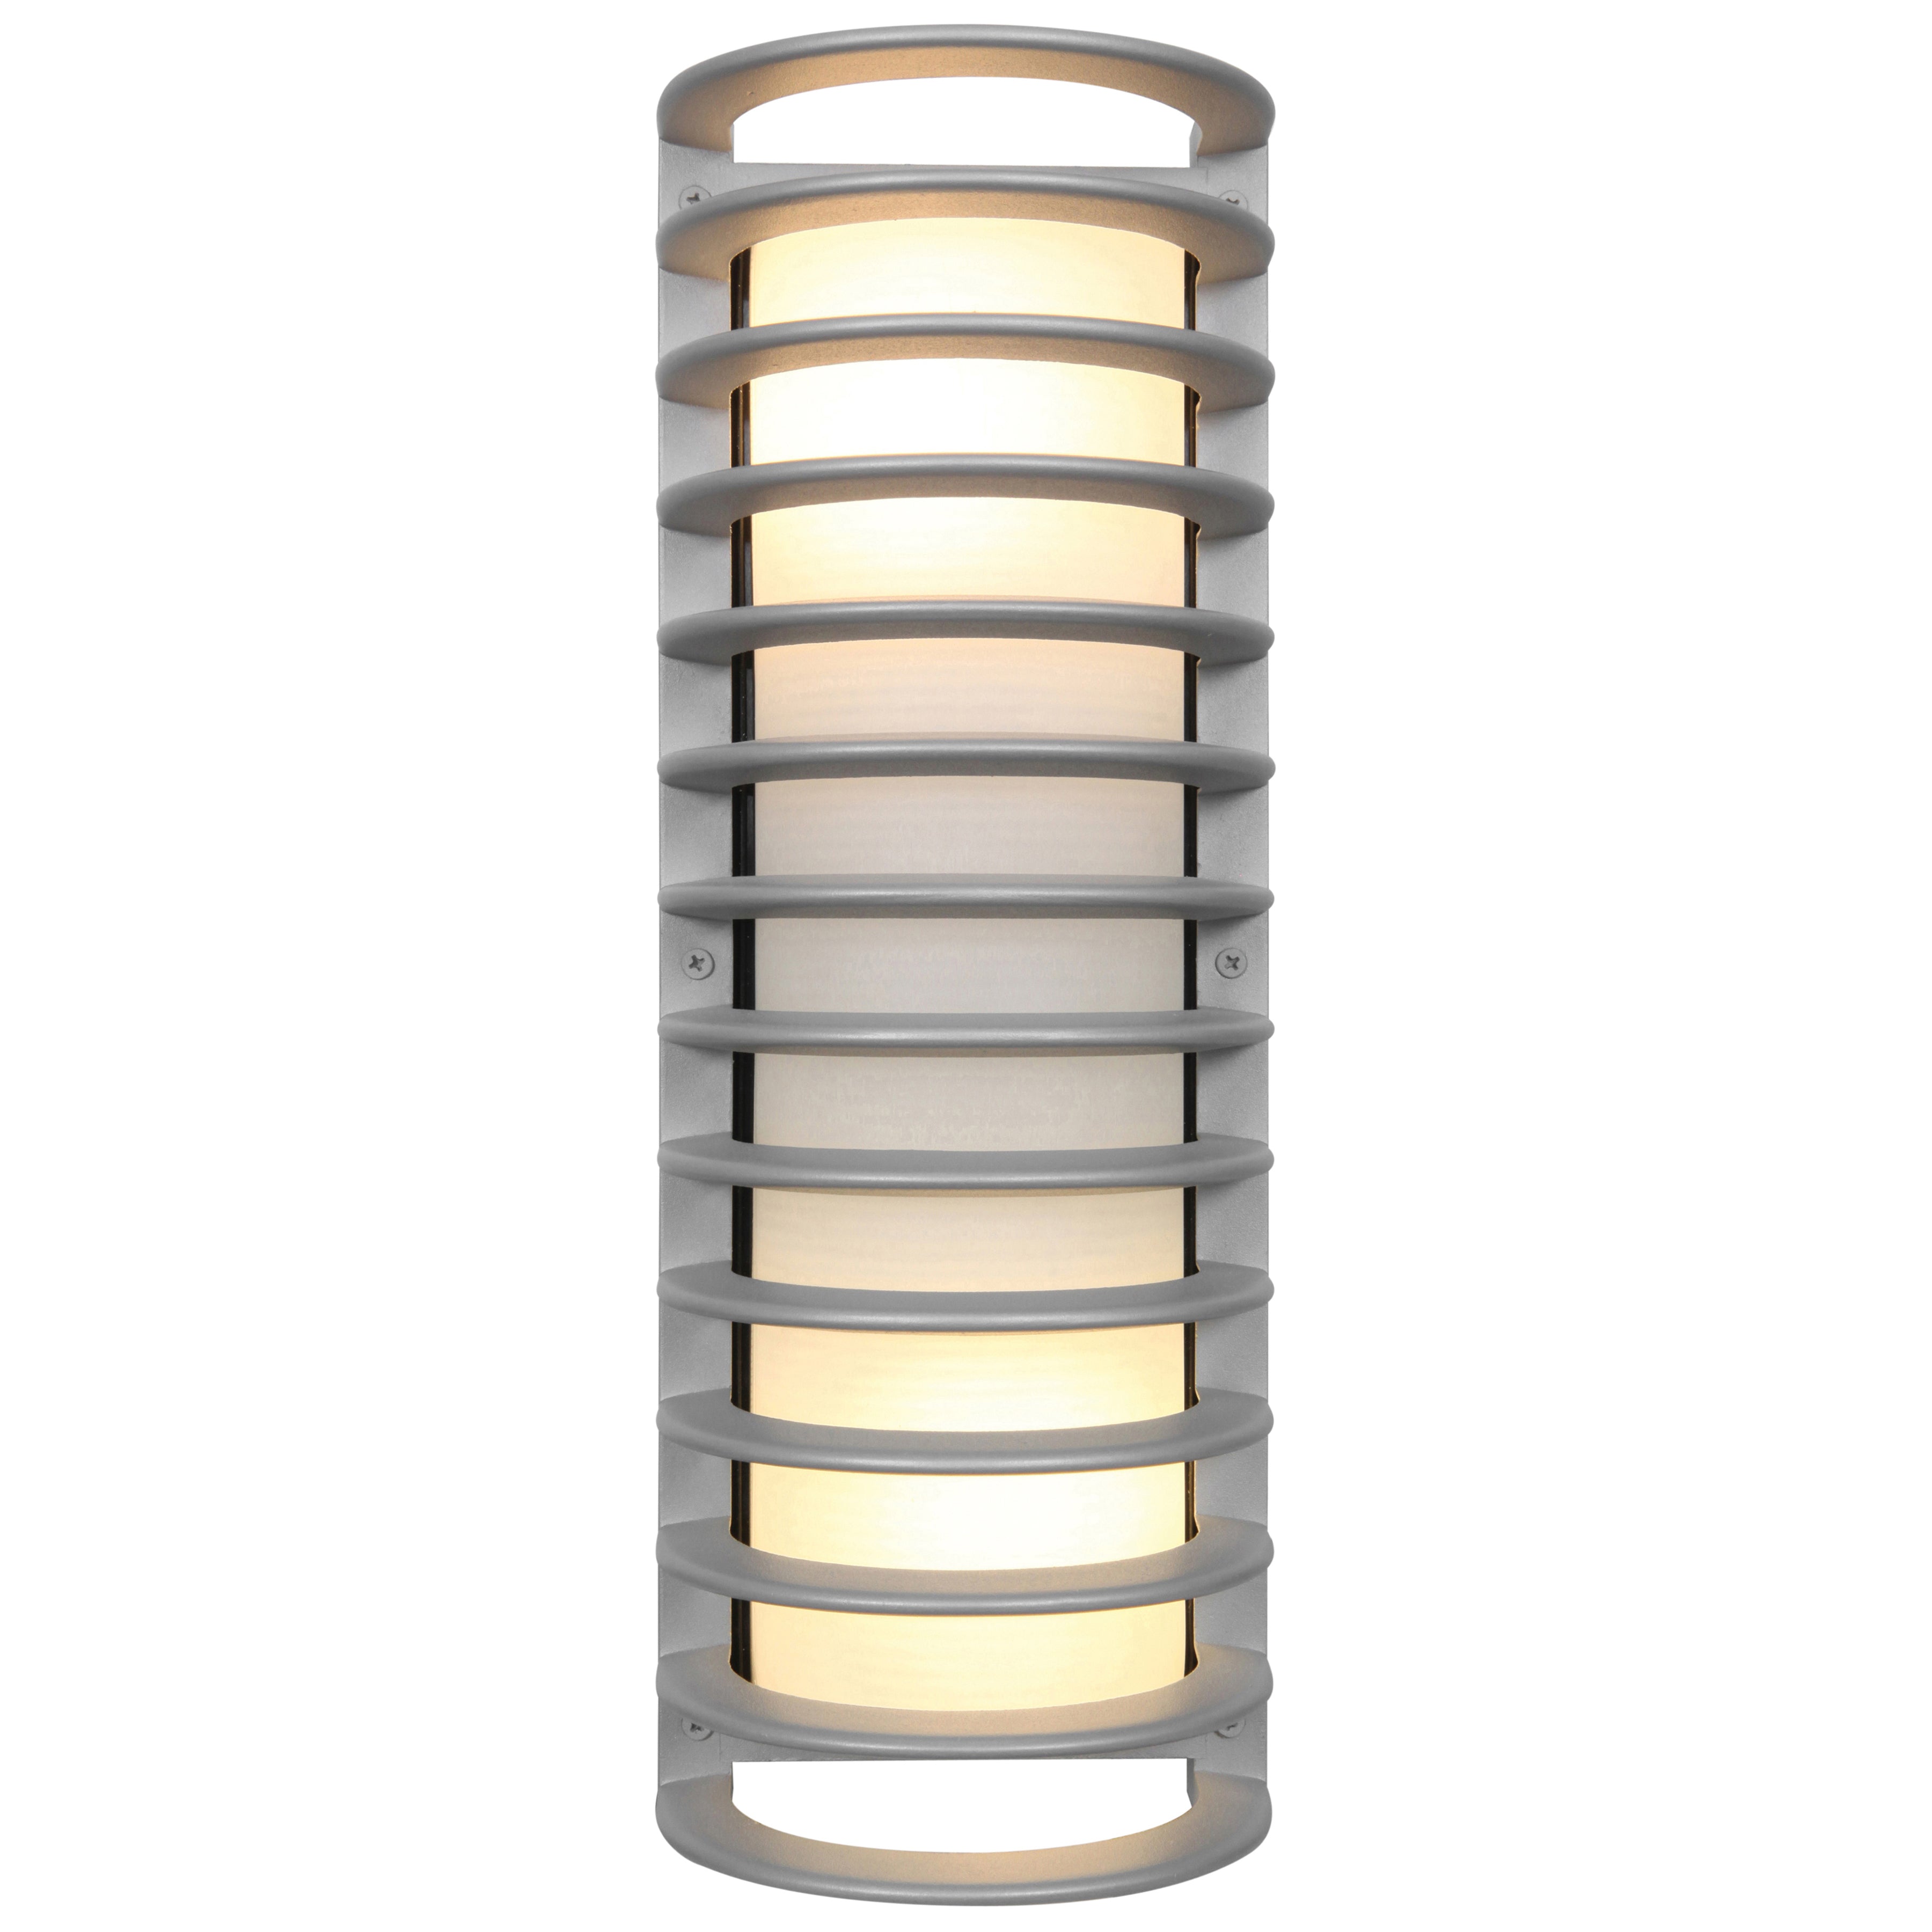 Bermuda 2 Light Outdoor LED Wall Mount Sconce